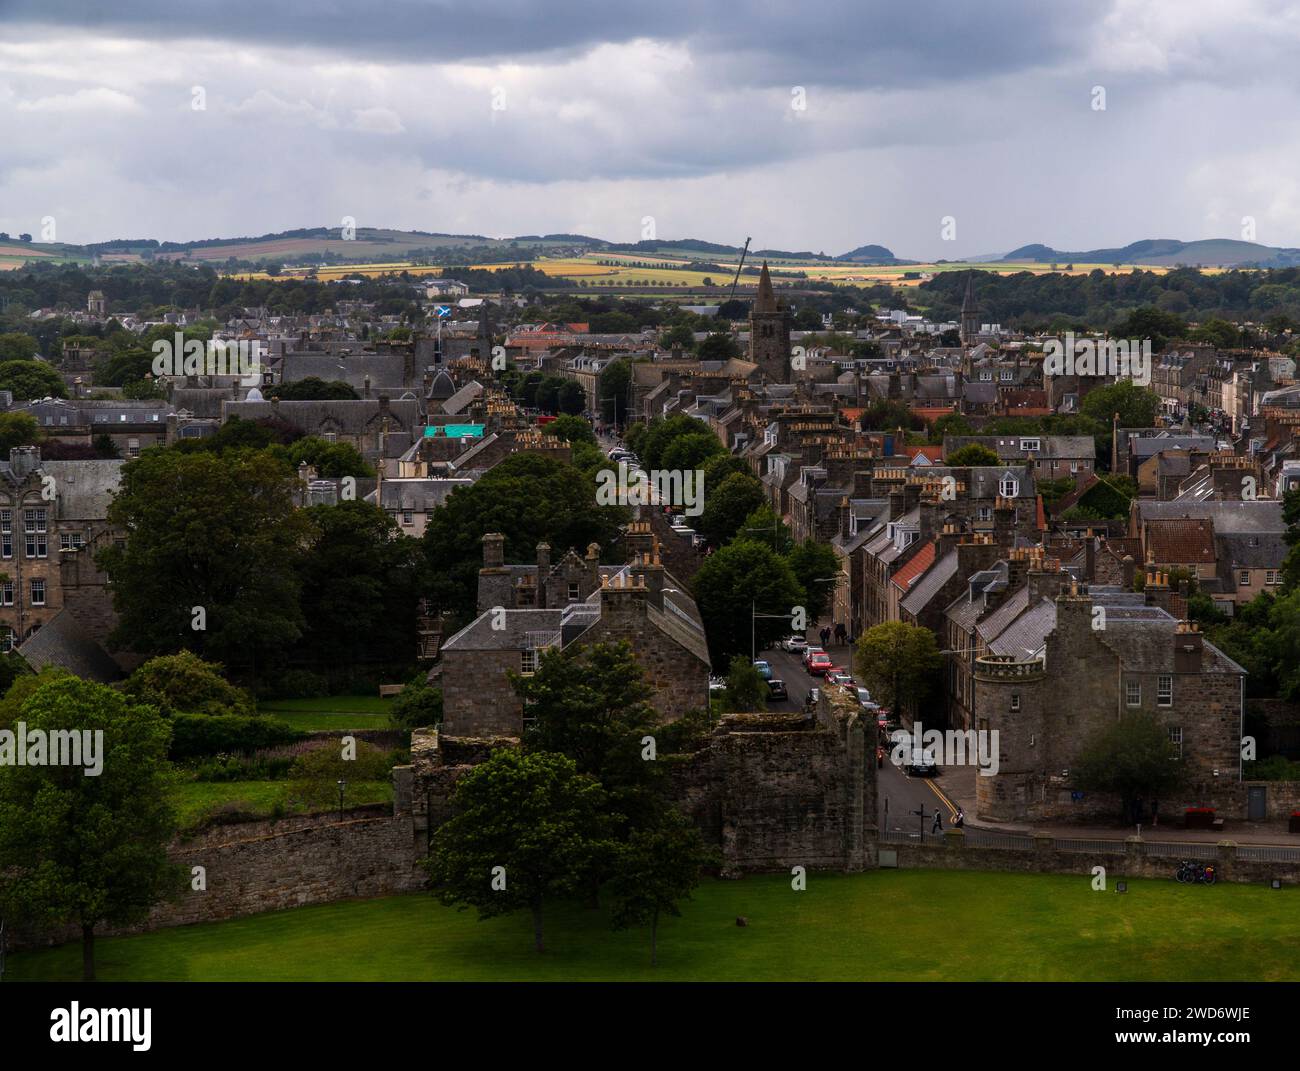 An aerial view of historic cityscape nestled amidst majestic mountains Stock Photo